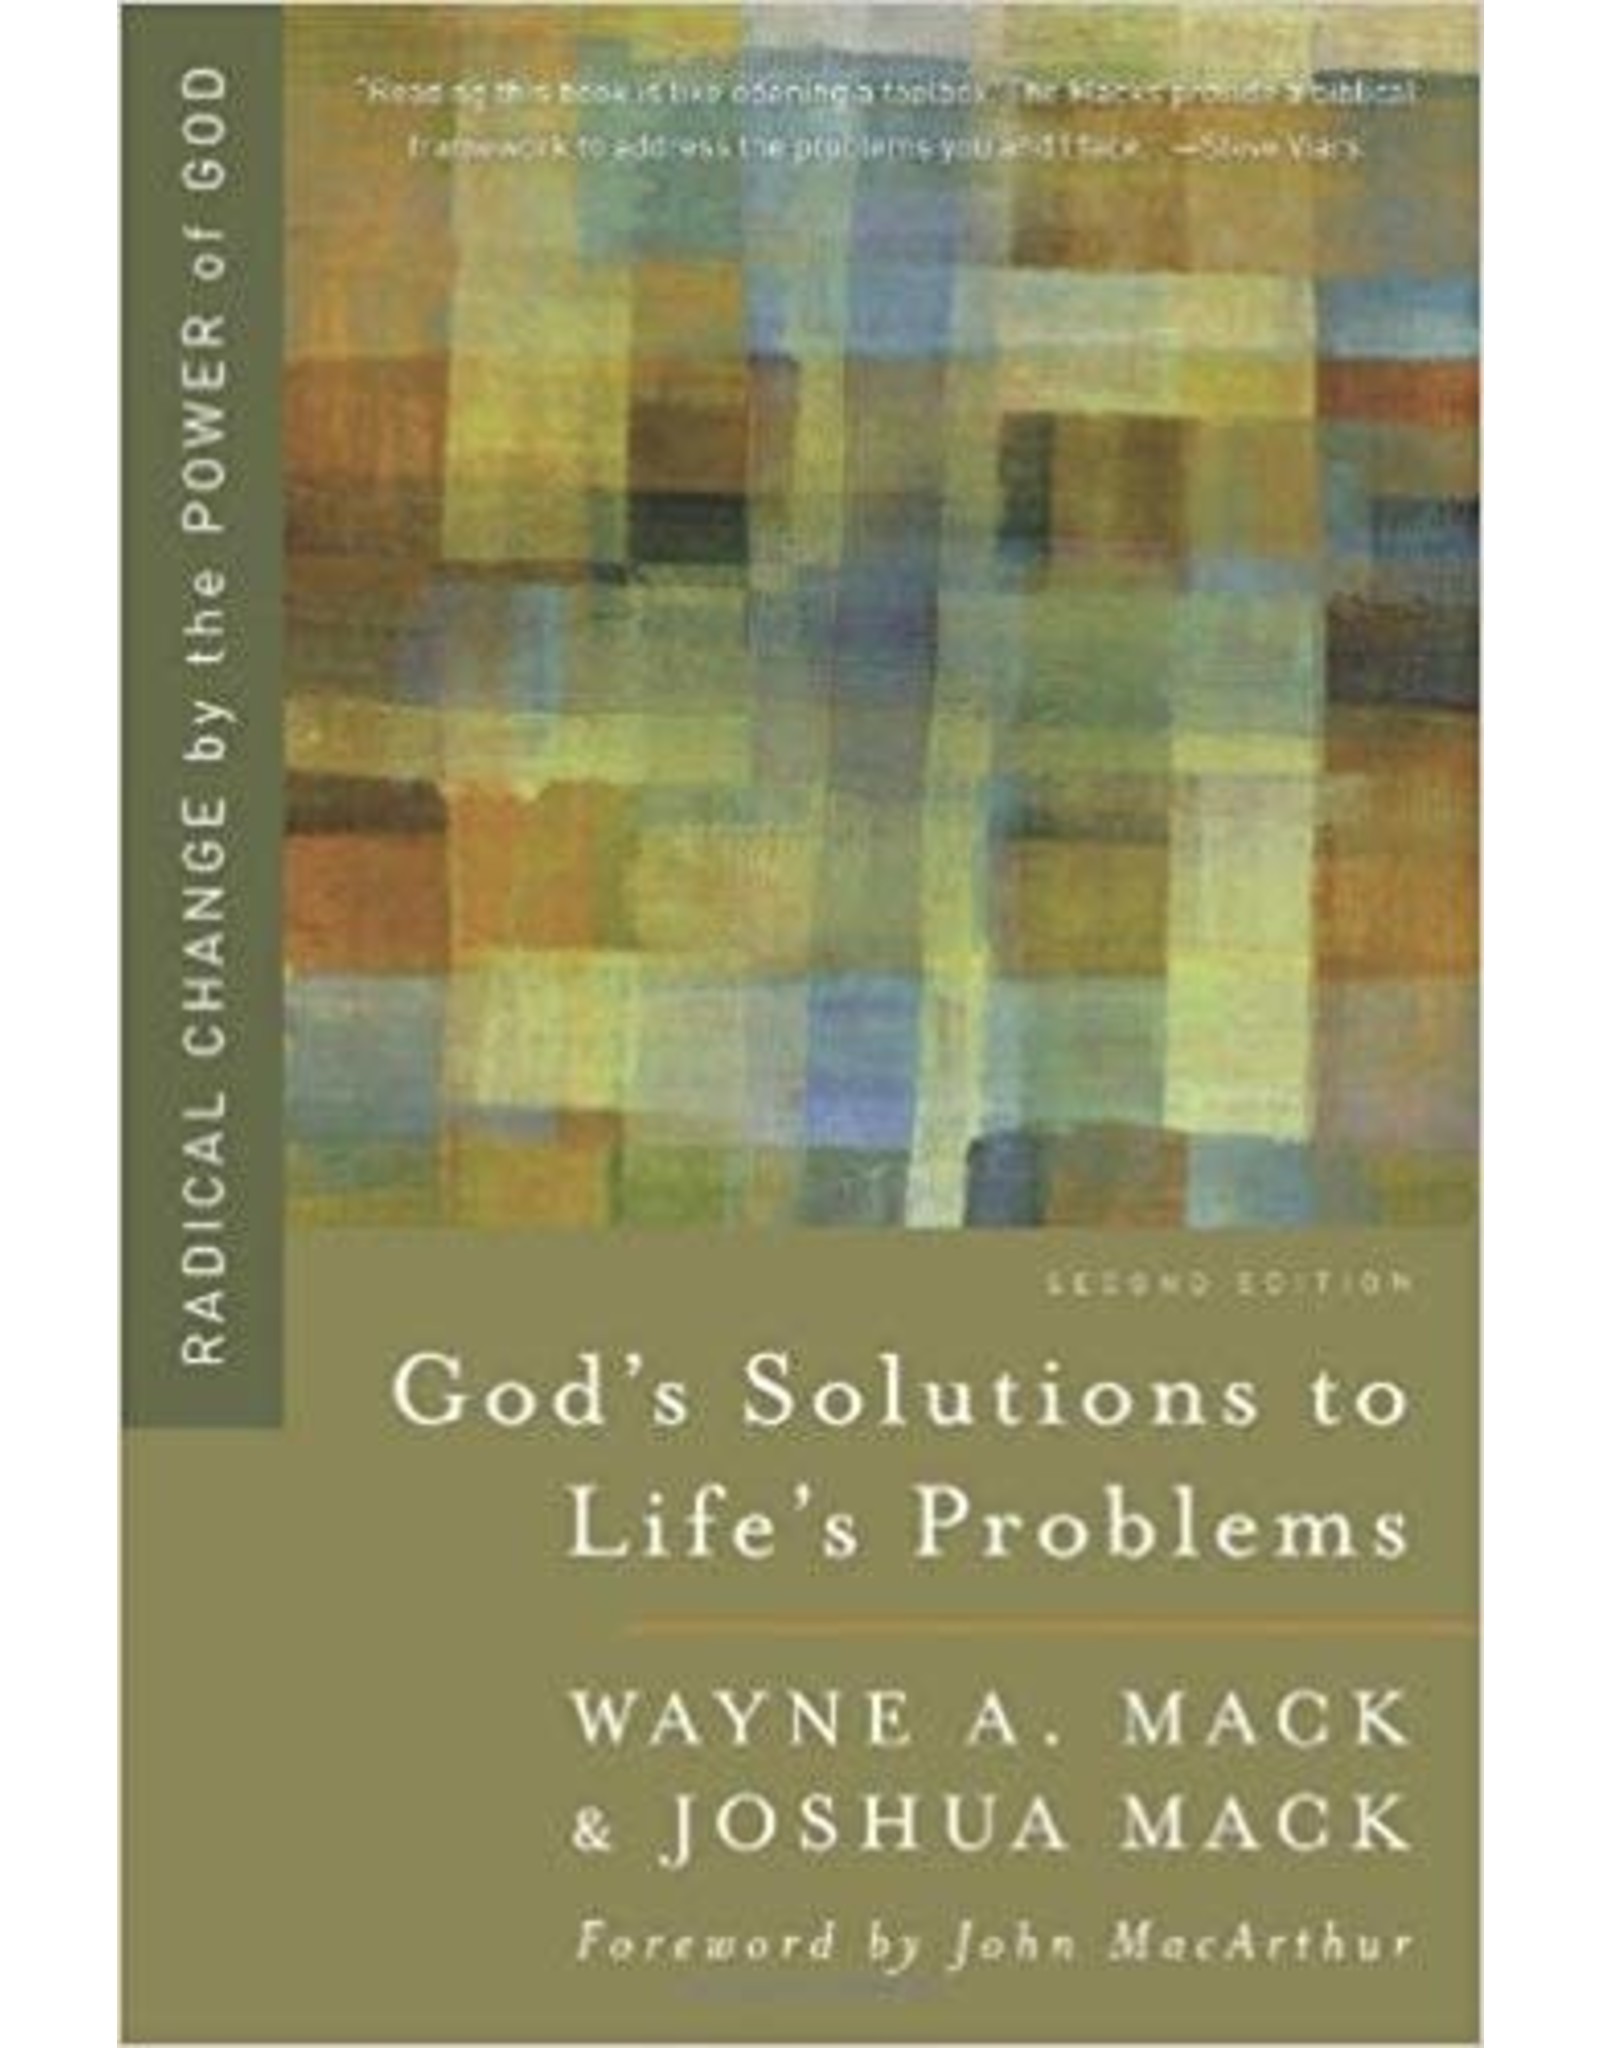 Wayne A Mack God's Solutions to Life's Problems